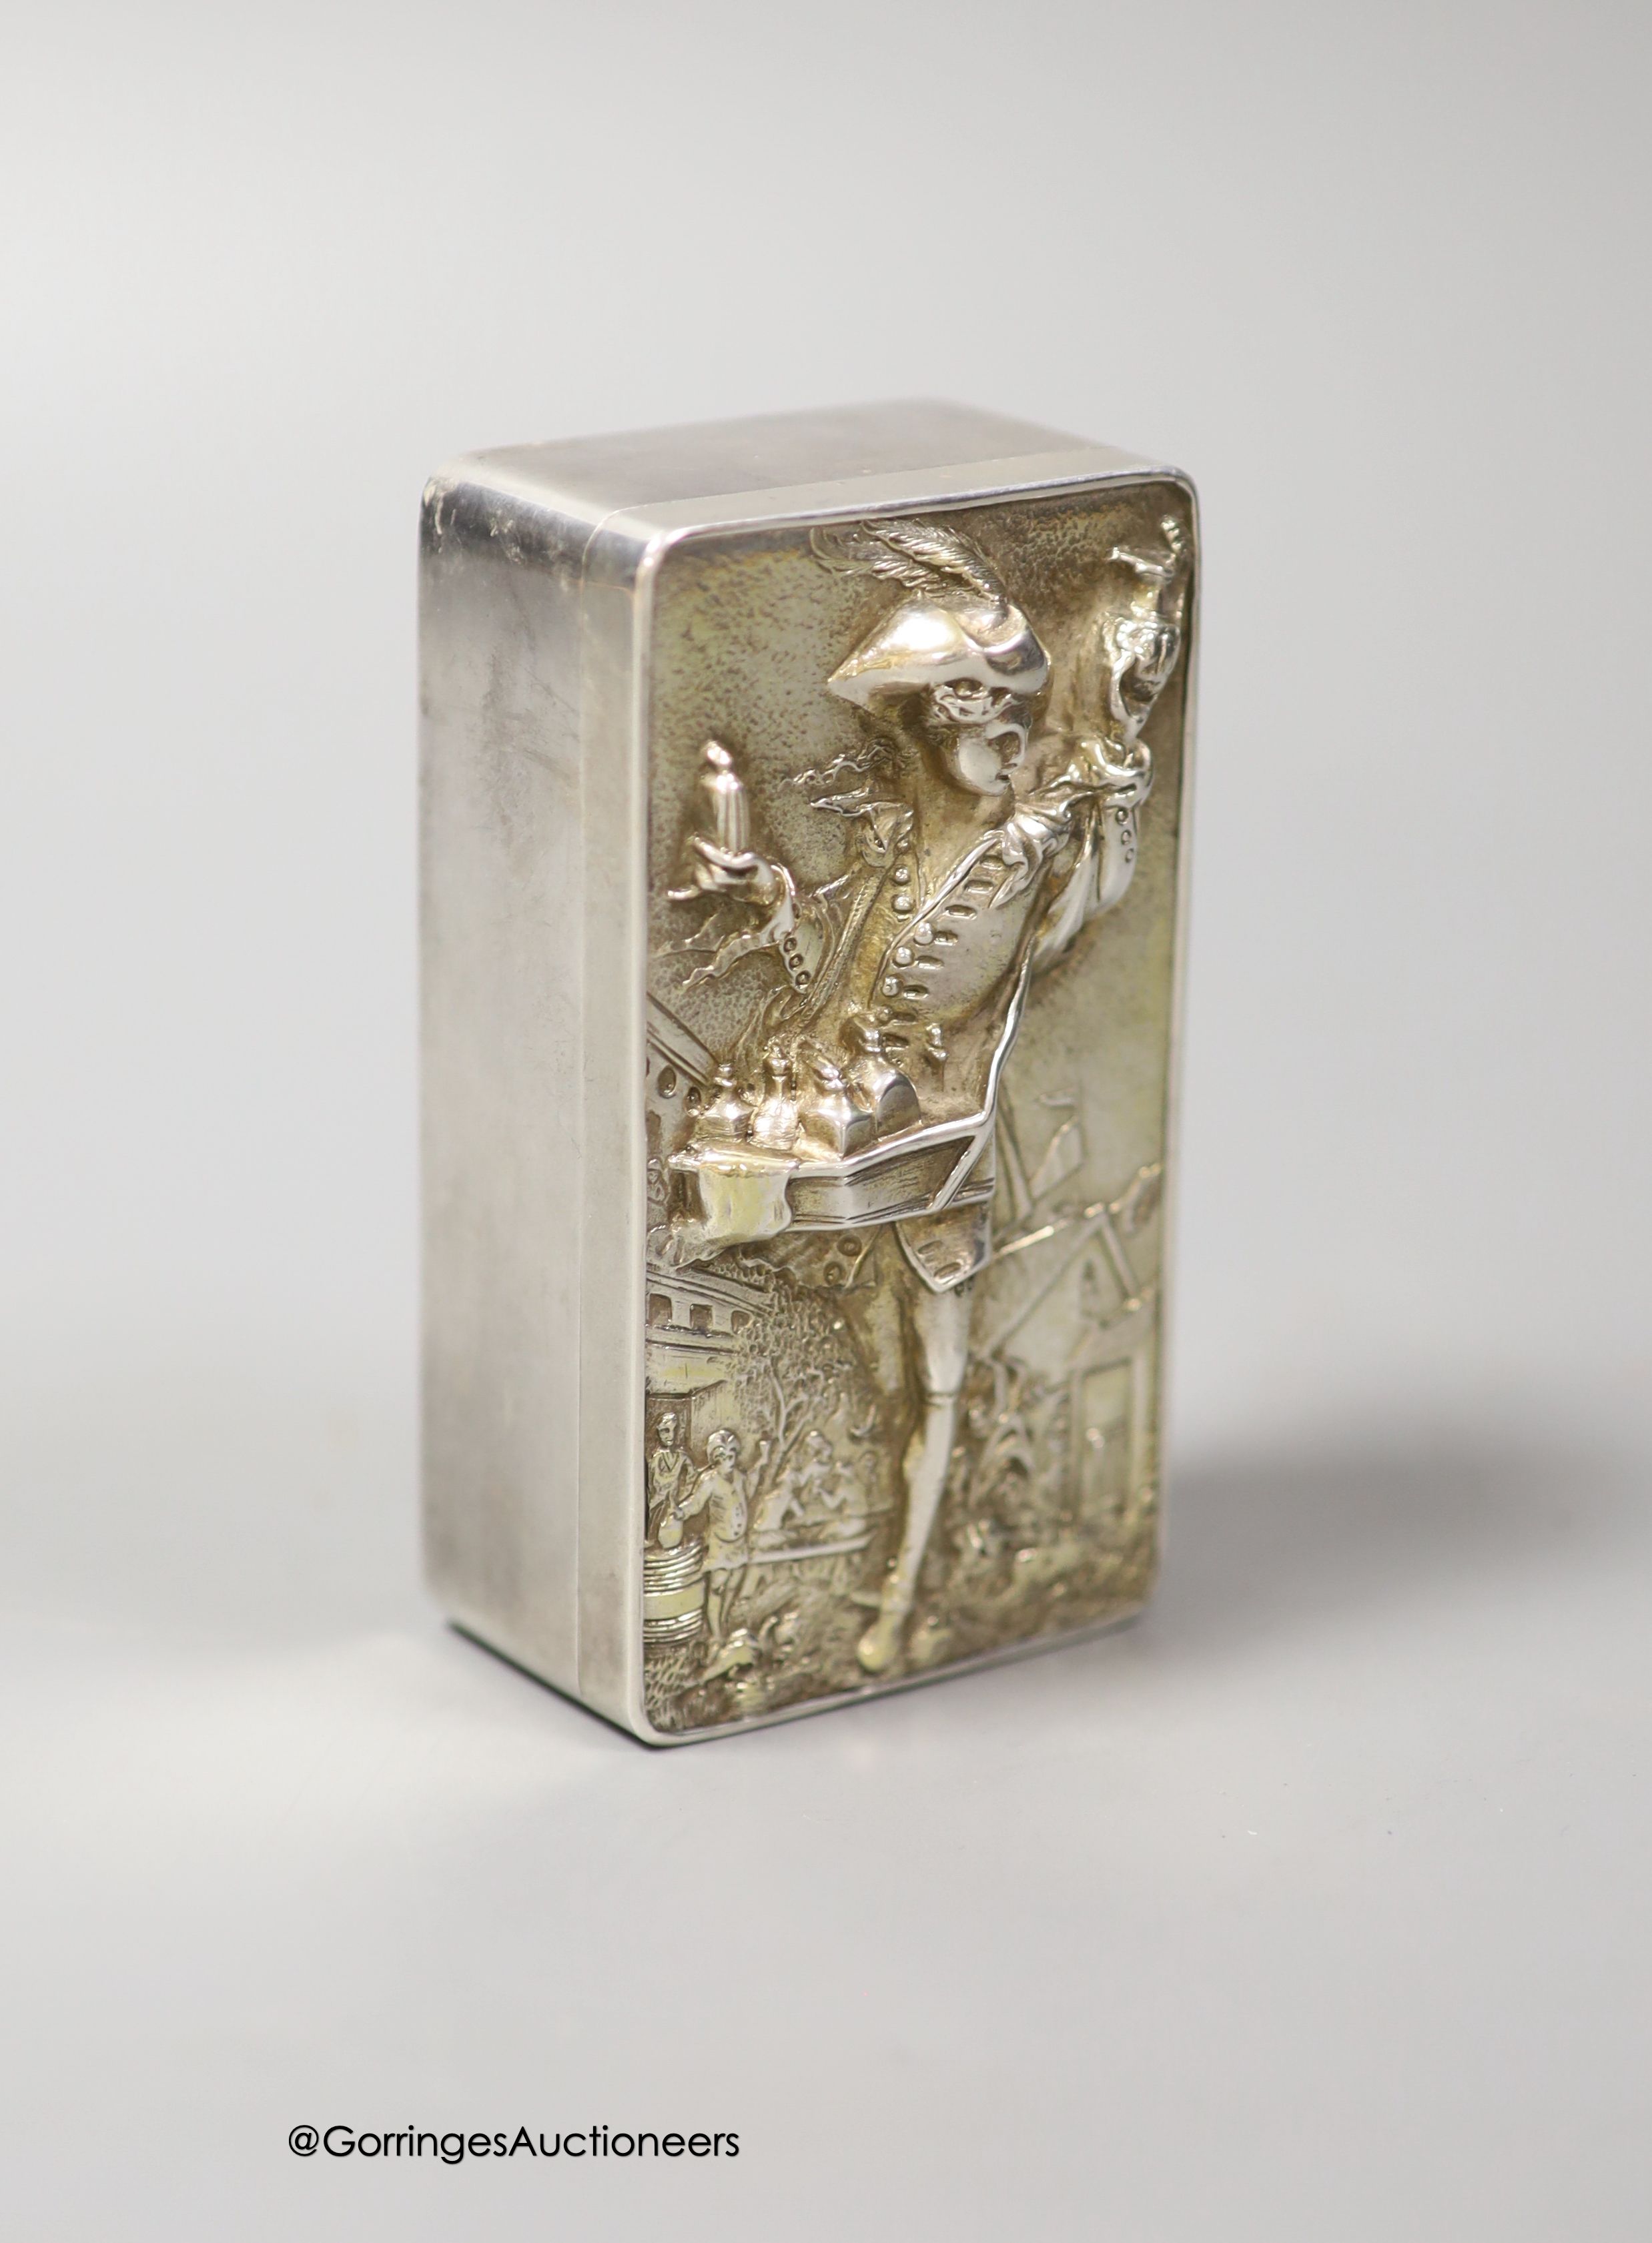 A late 19th/early 20th century continental white metal rectangular box and cover, the lid embossed with the figure of a pedlar, 9.5cm, 155 grams.